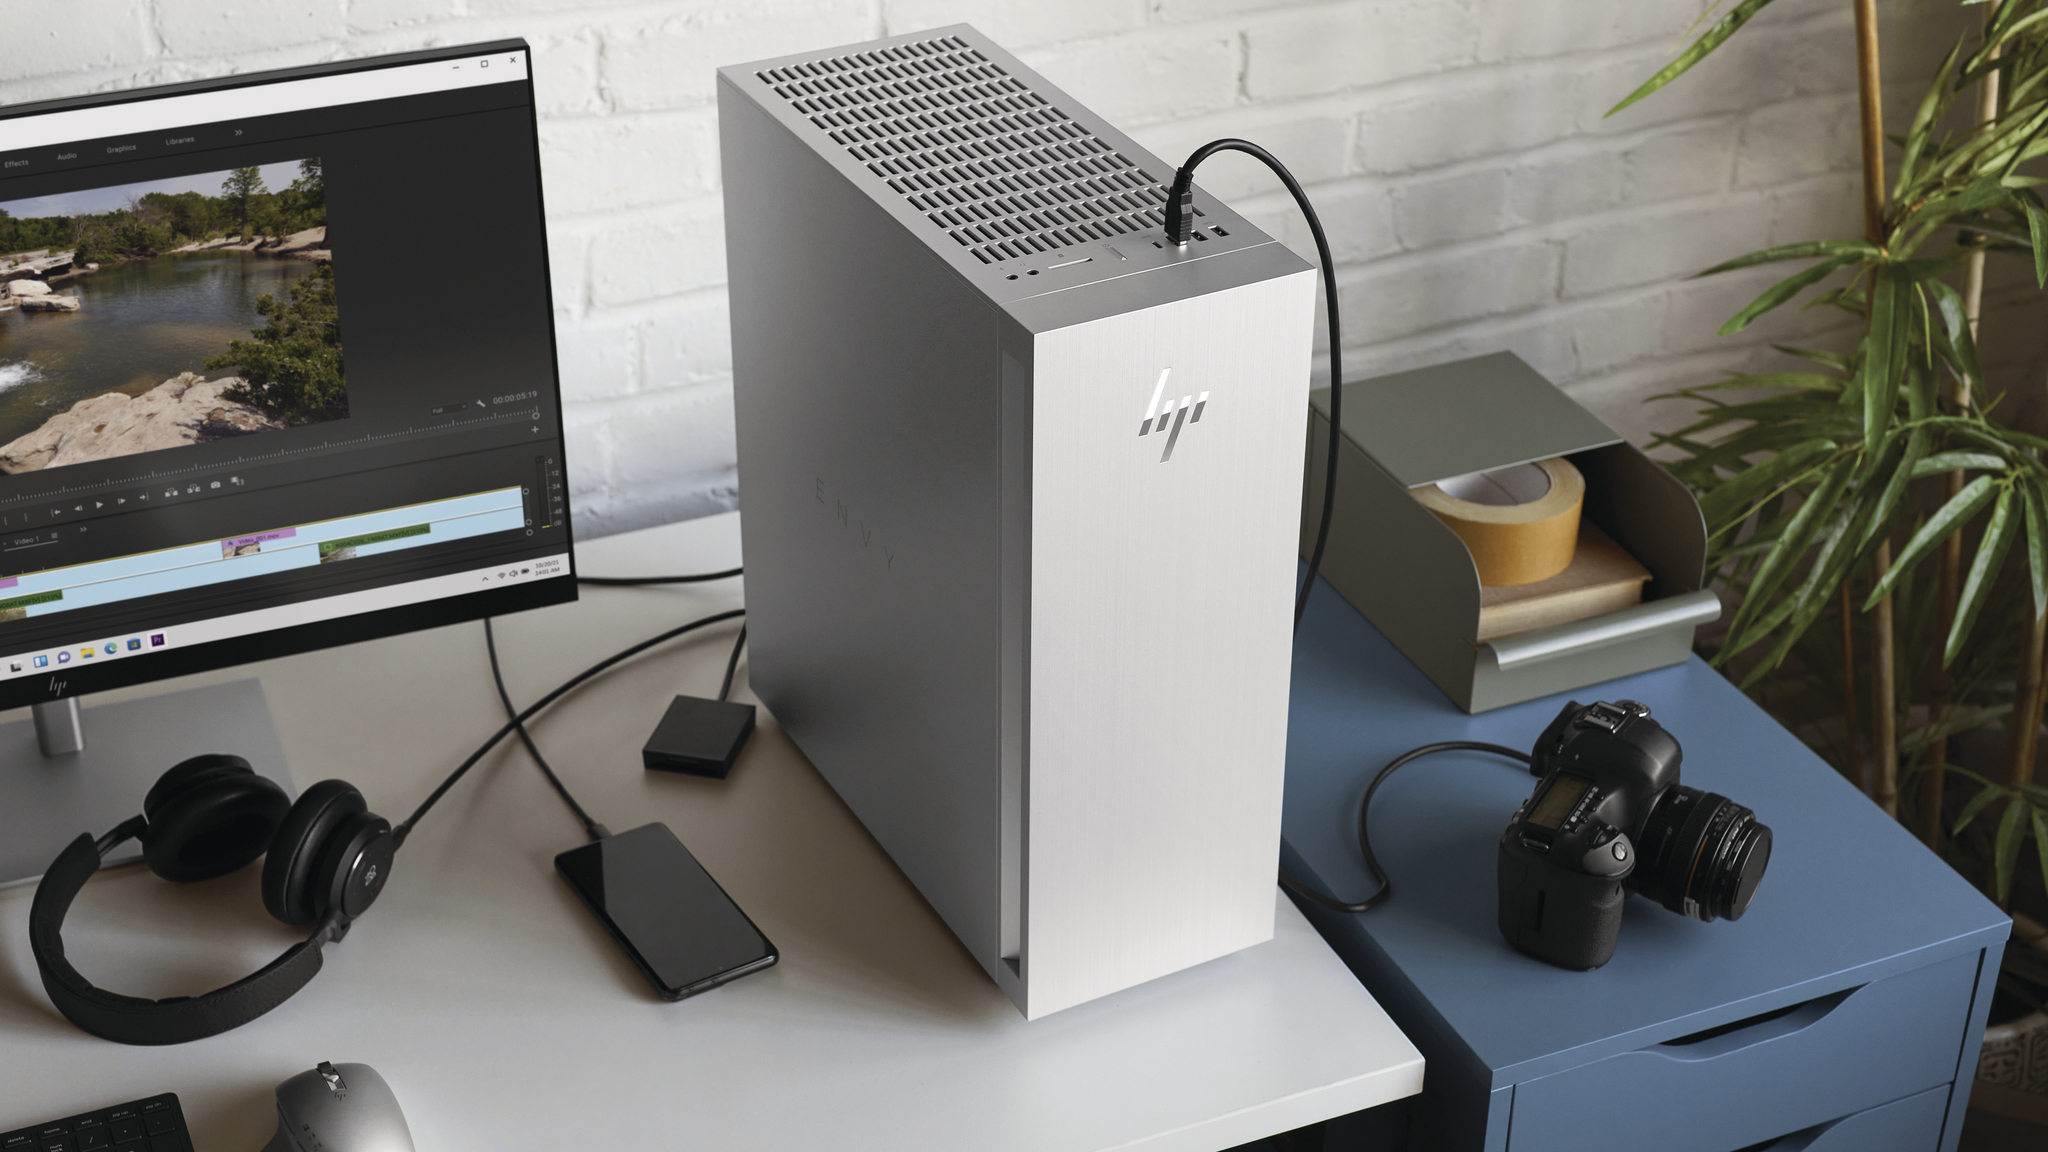 HP Envy Desktop pre-built gaming PC with up to an Intel Core i9-12900K, Nvidia GeForce RTX 3080 Ti and PSU - NotebookCheck.net News